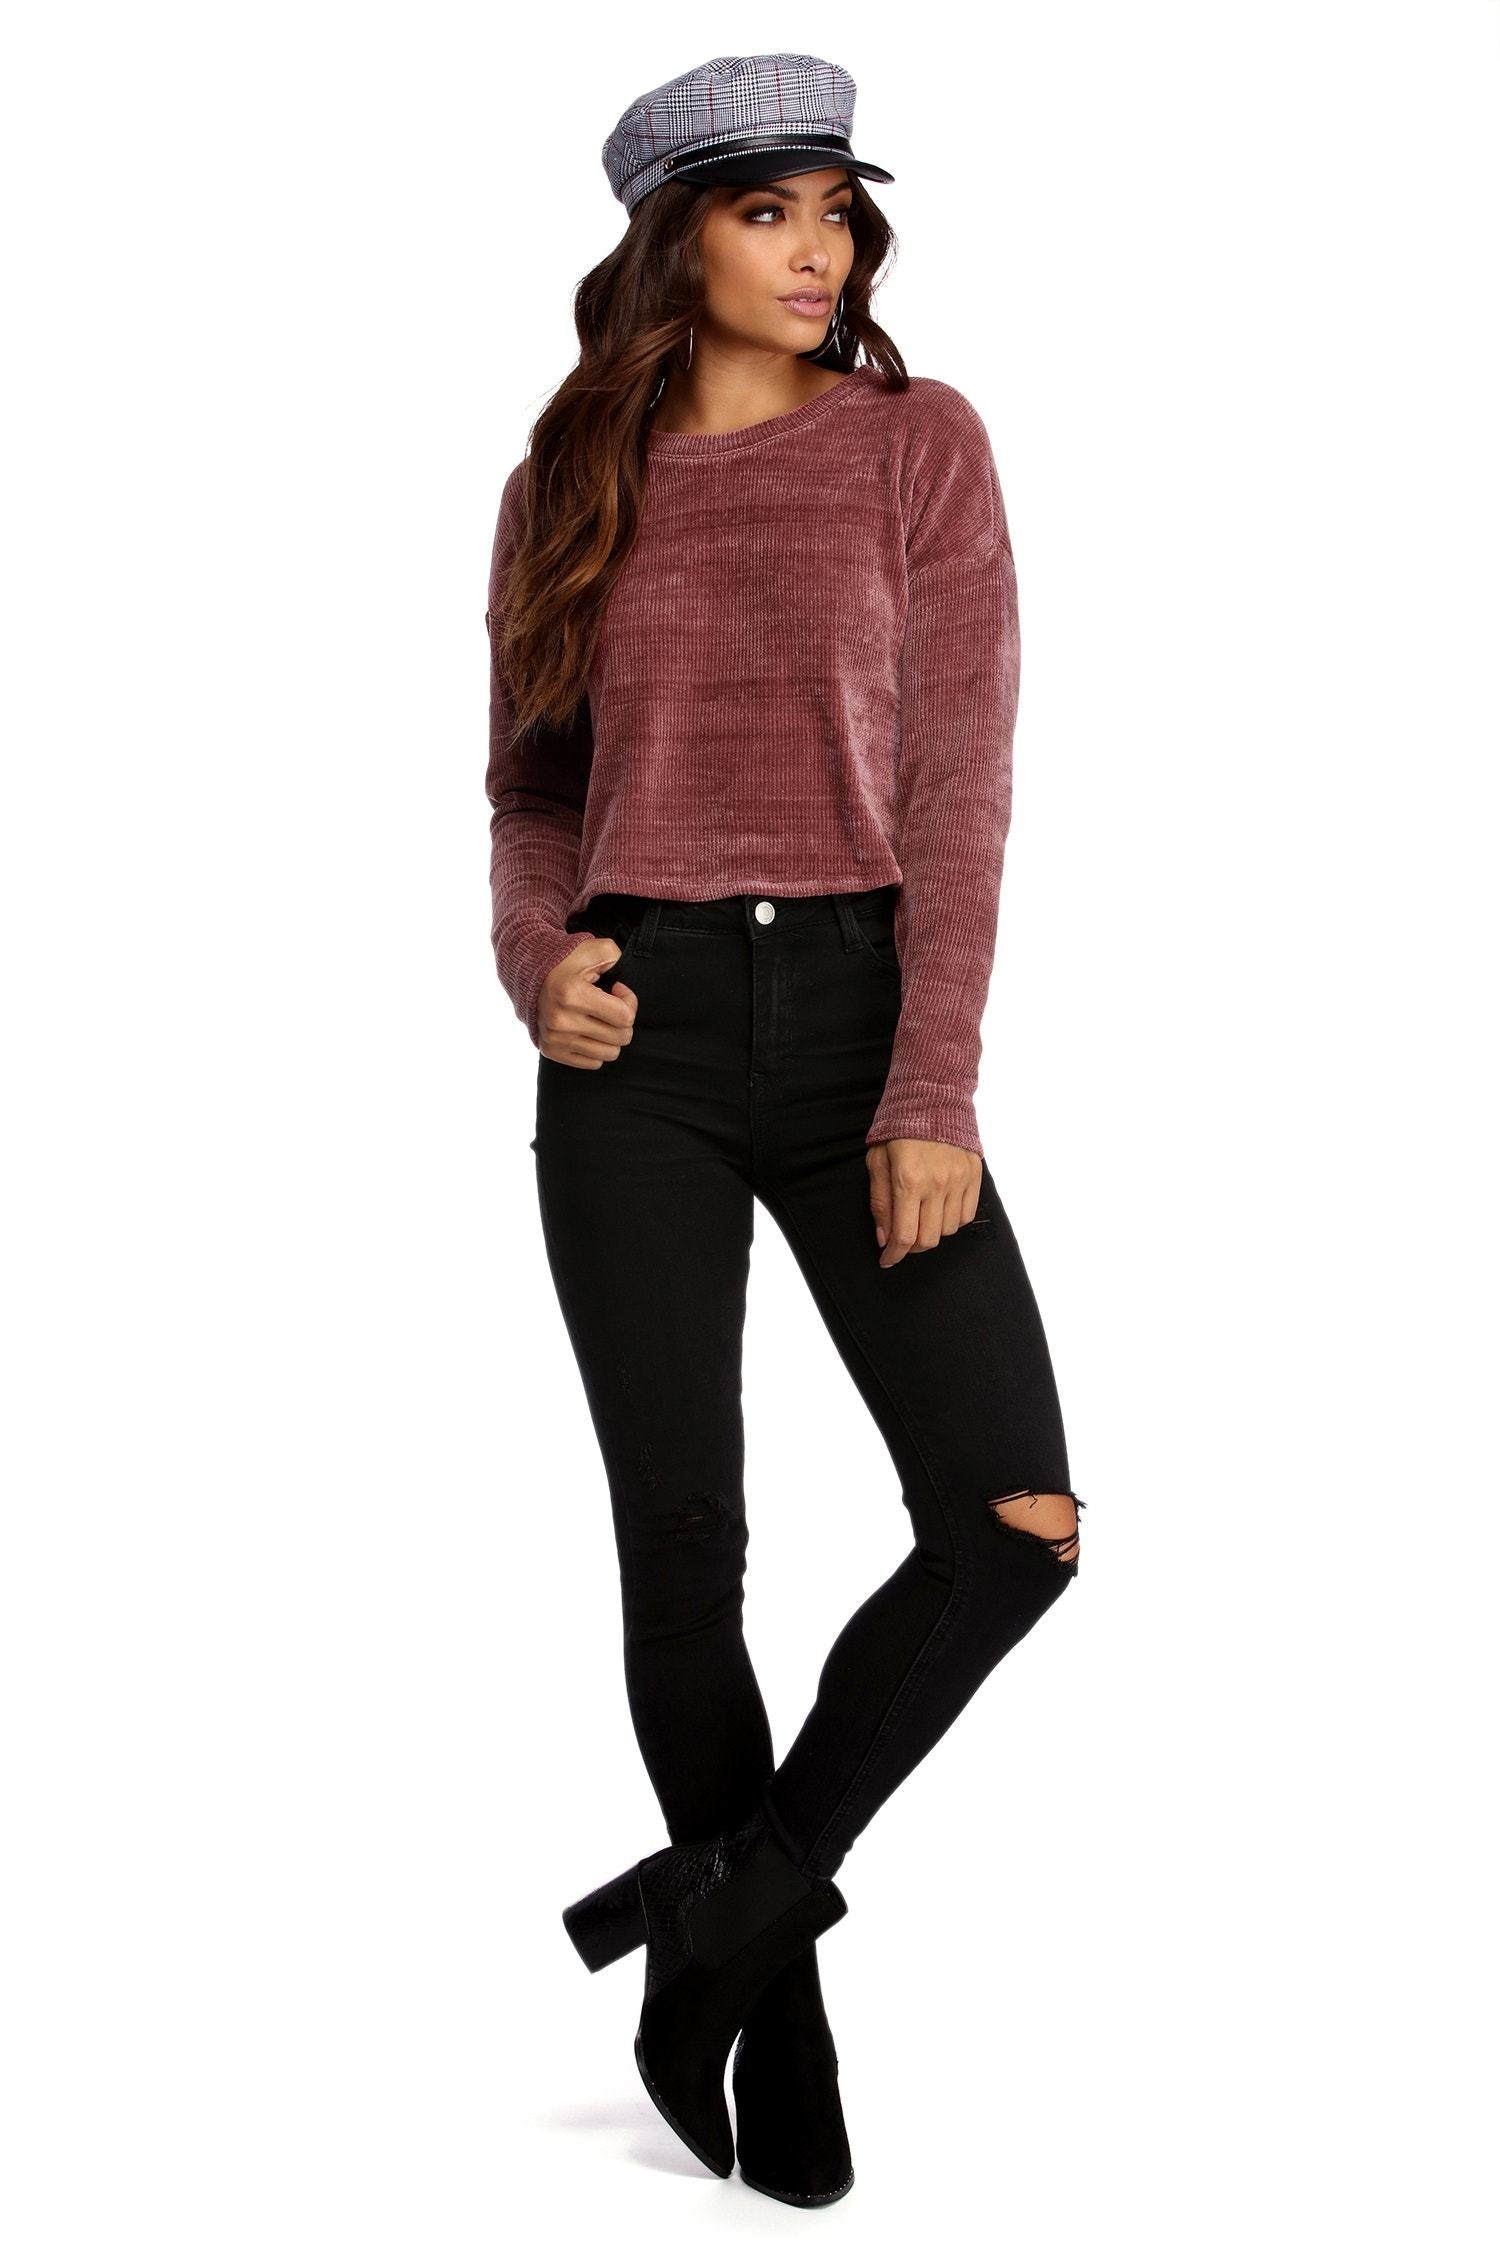 Chenille With You Pullover Top